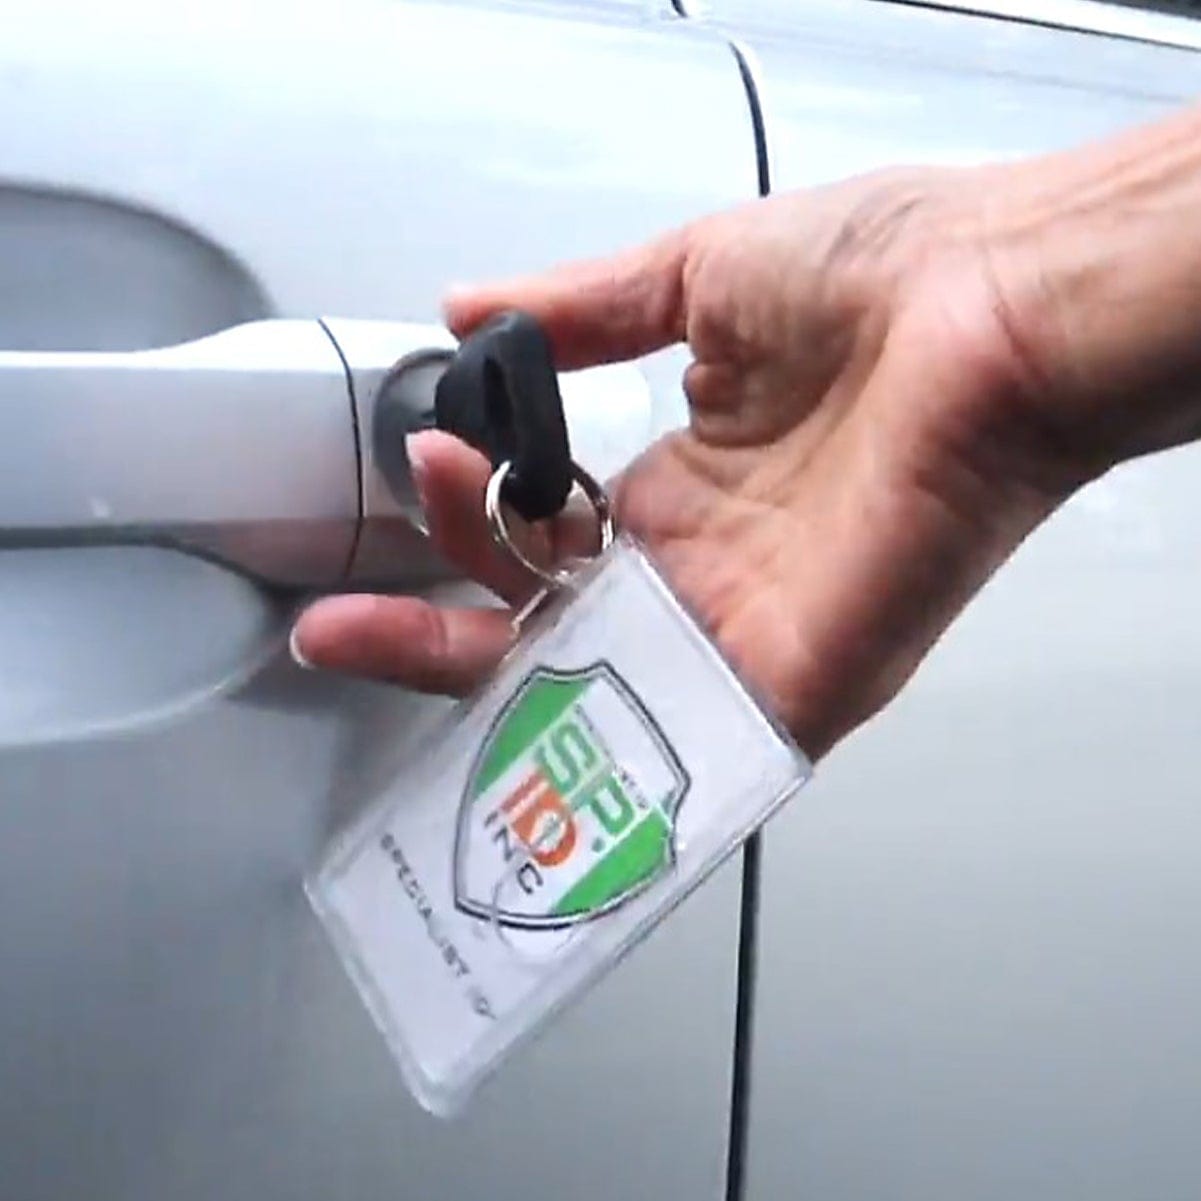 Two Card Vertical Clear Rigid Plastic Fuel Card and Badge Holder with Keychain (SPID-1220) SPID-1220